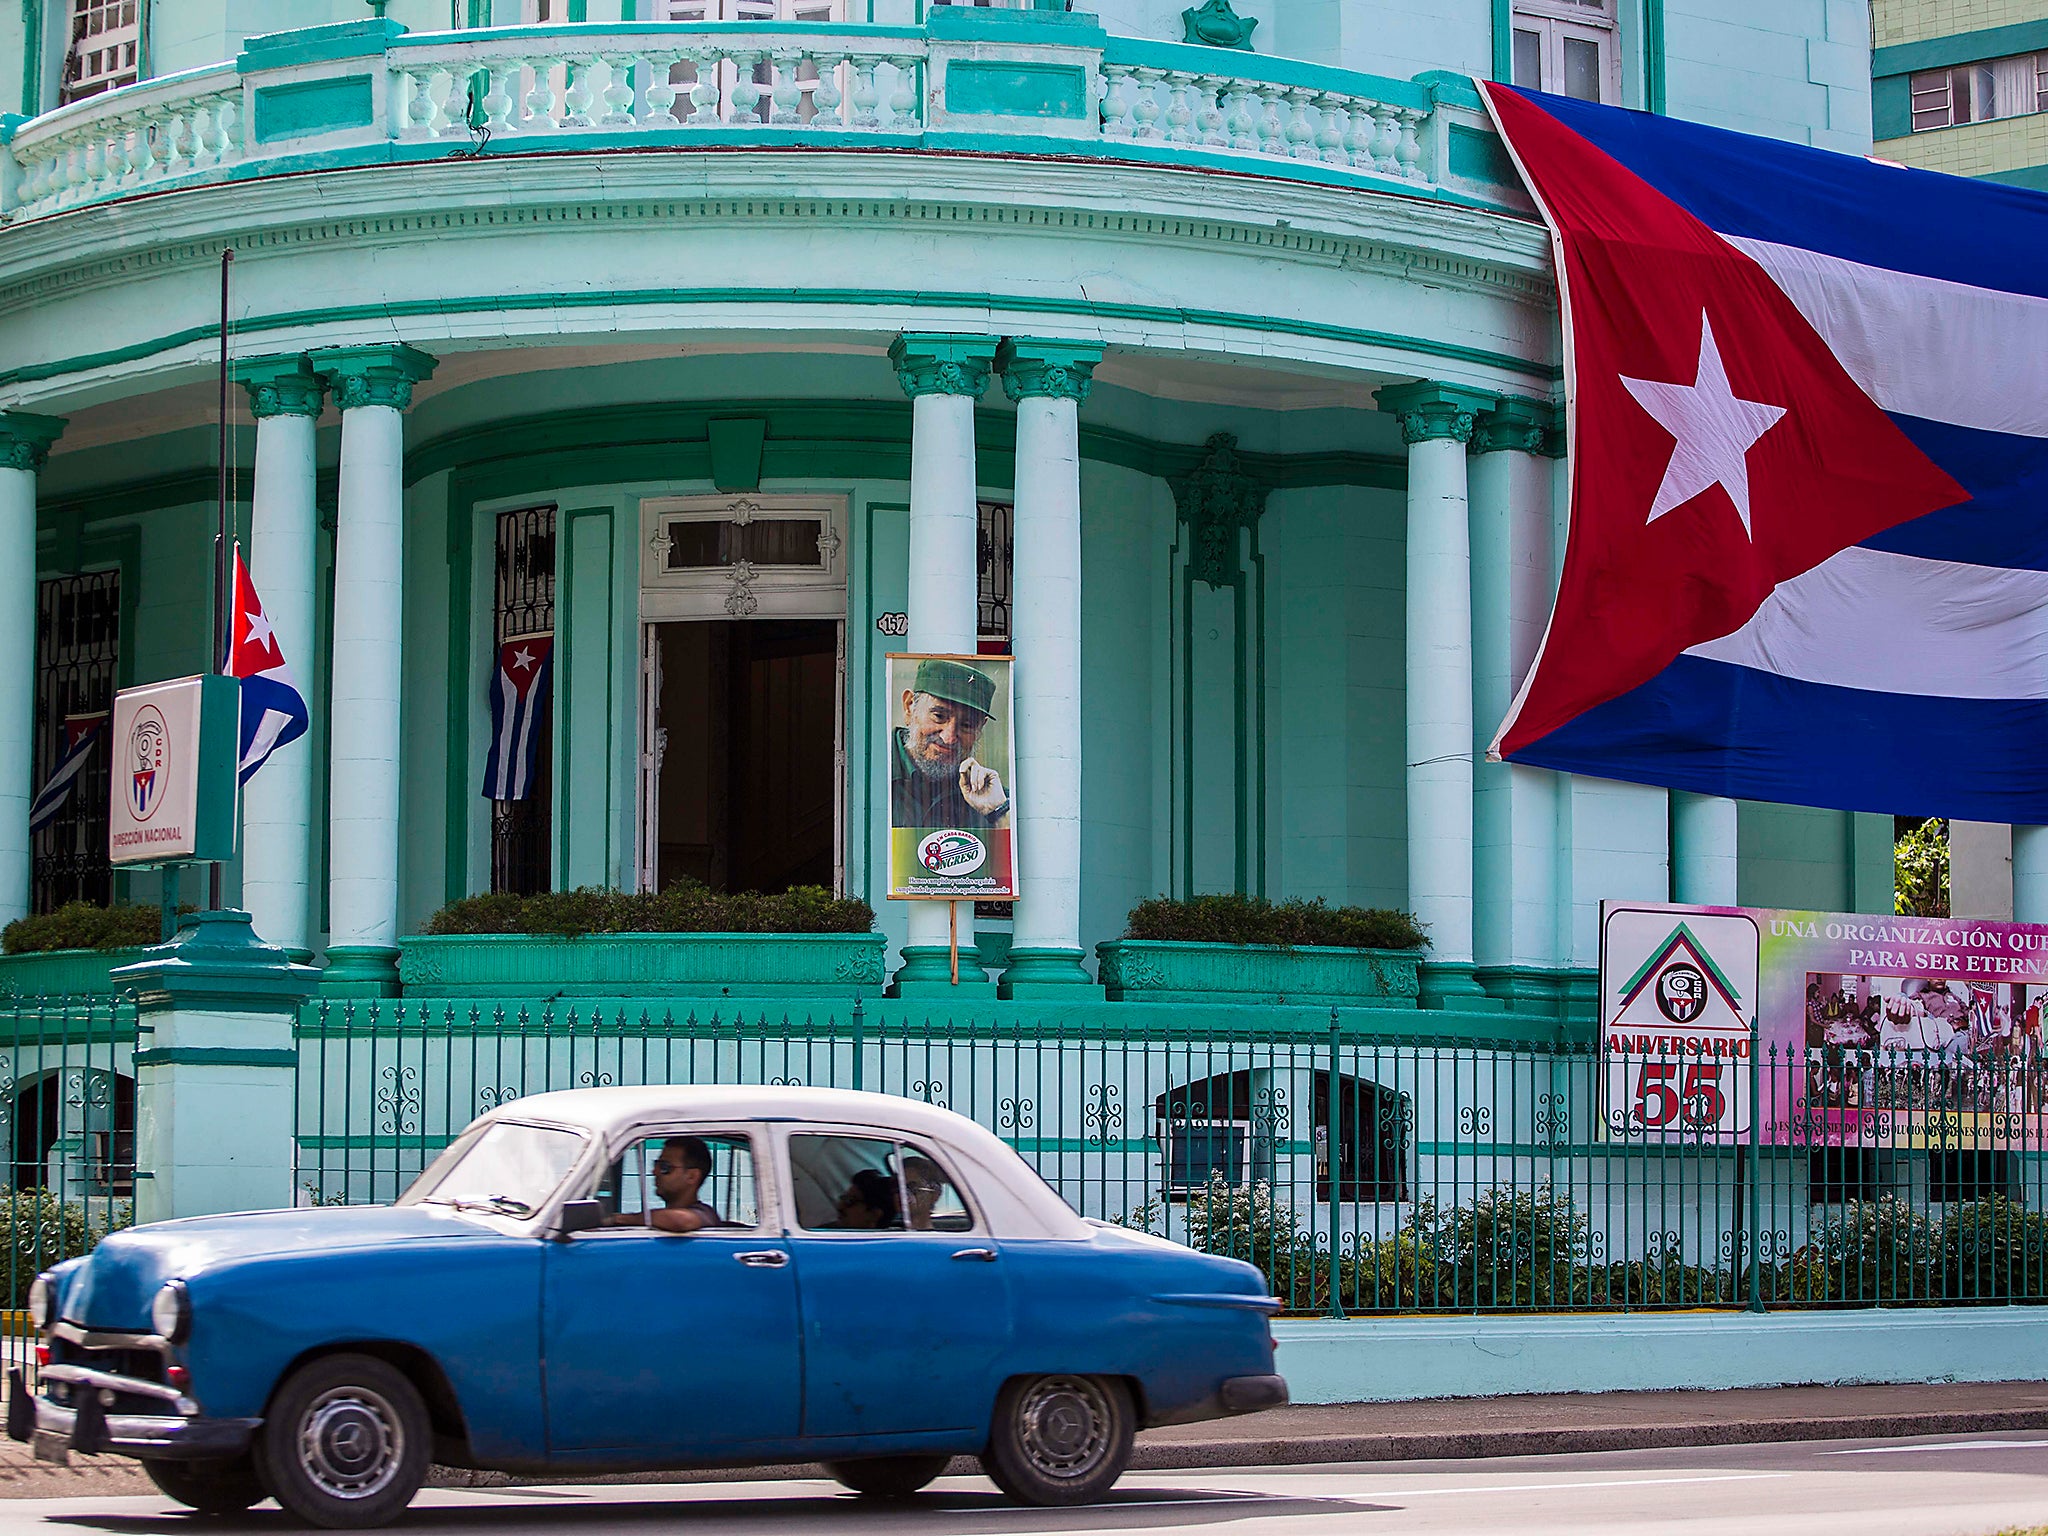 Nations such as Cuba can no longer depend on the Soviets for support (